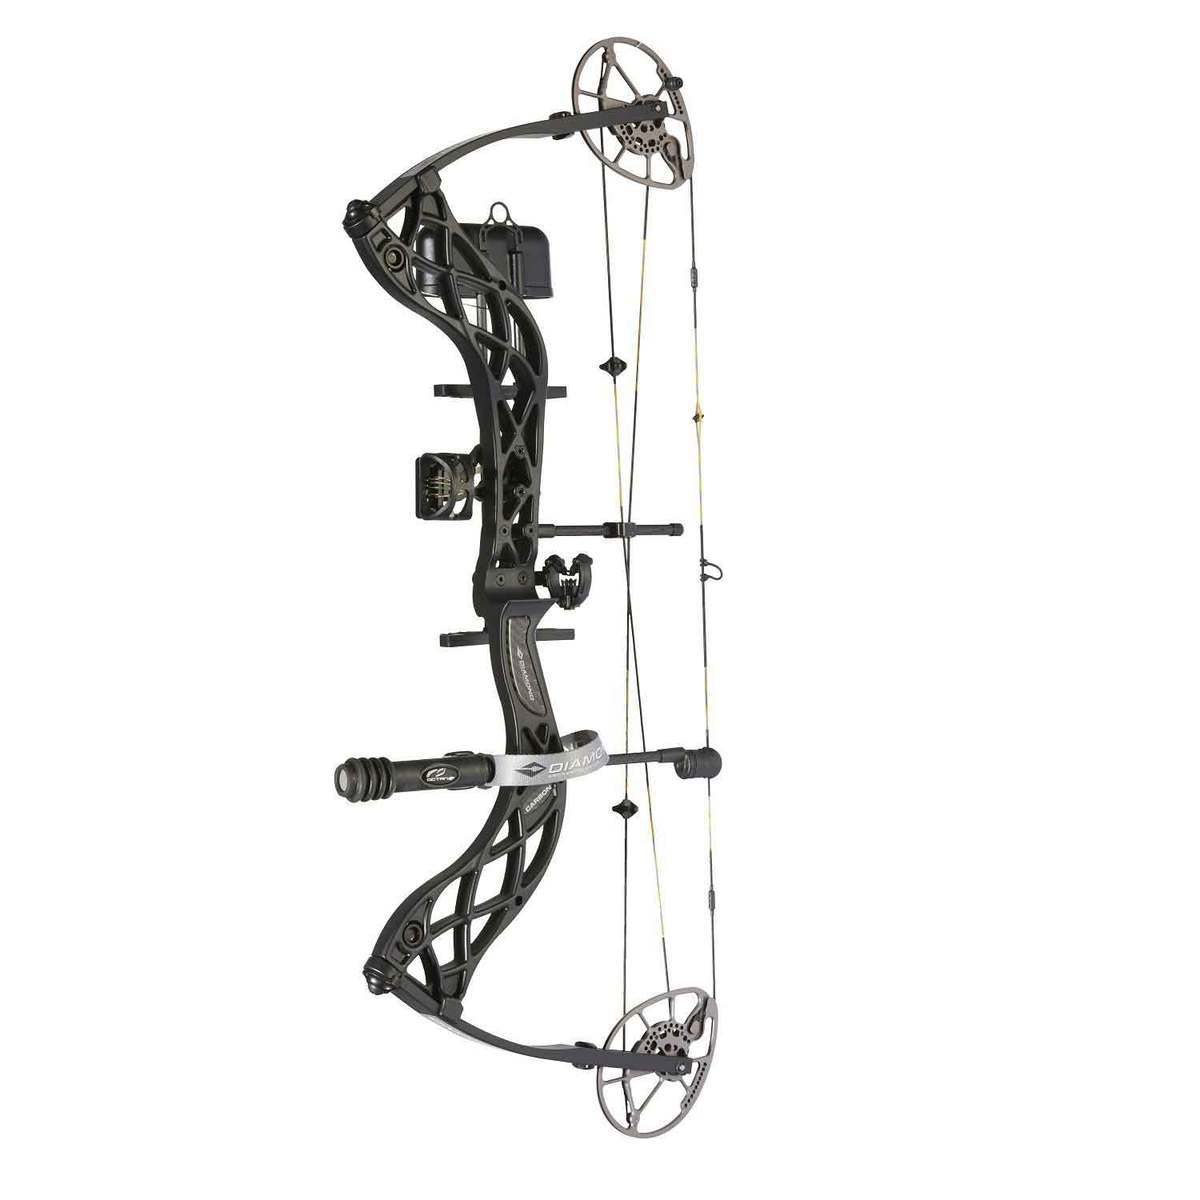 Diamond Deploy SB 70lbs Right Hand Micro Carbon Compound Bow - RAK Package